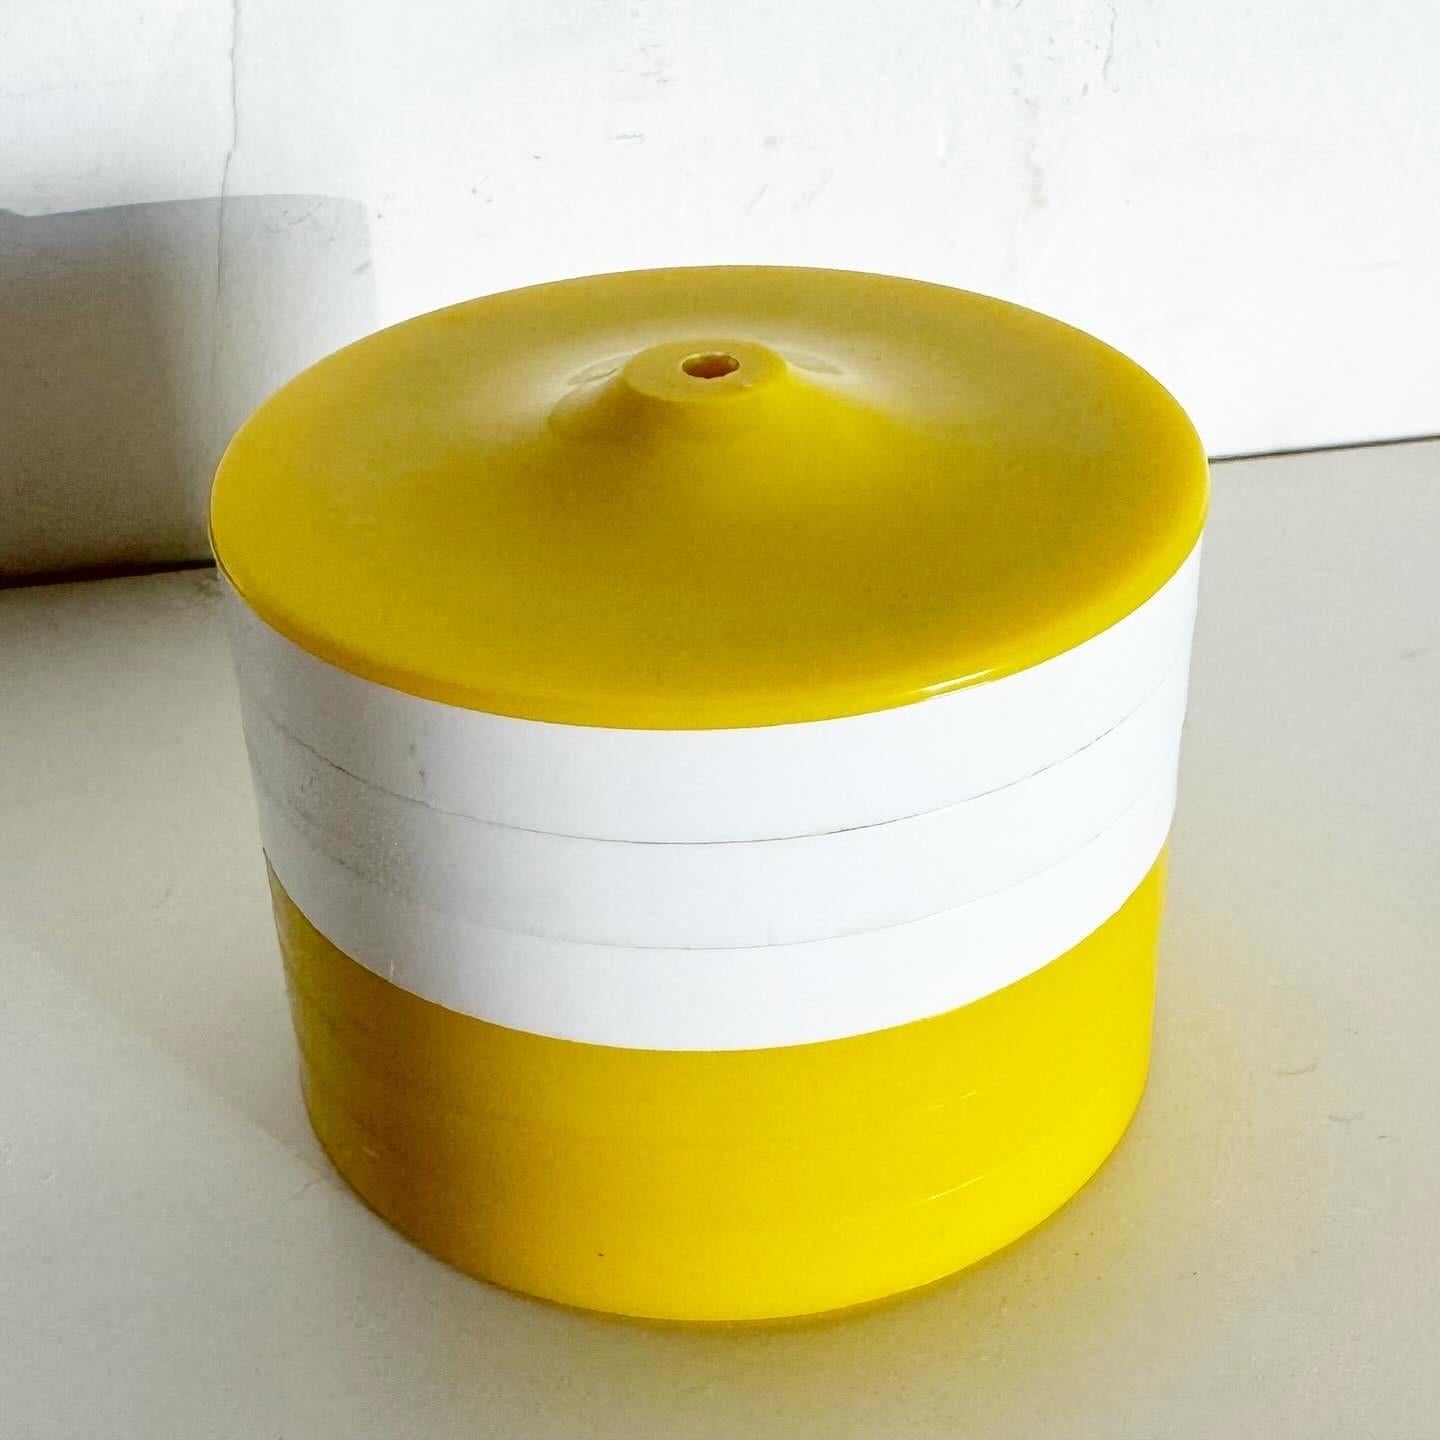 Embrace retro charm with Vintage Retro Plastic and Cork Yellow and White Stacking Coasters by Benhof, a set that blends style with functionality. Offering a perfect mix of retro design and practical use.
Vintage pieces may have age-related wear.